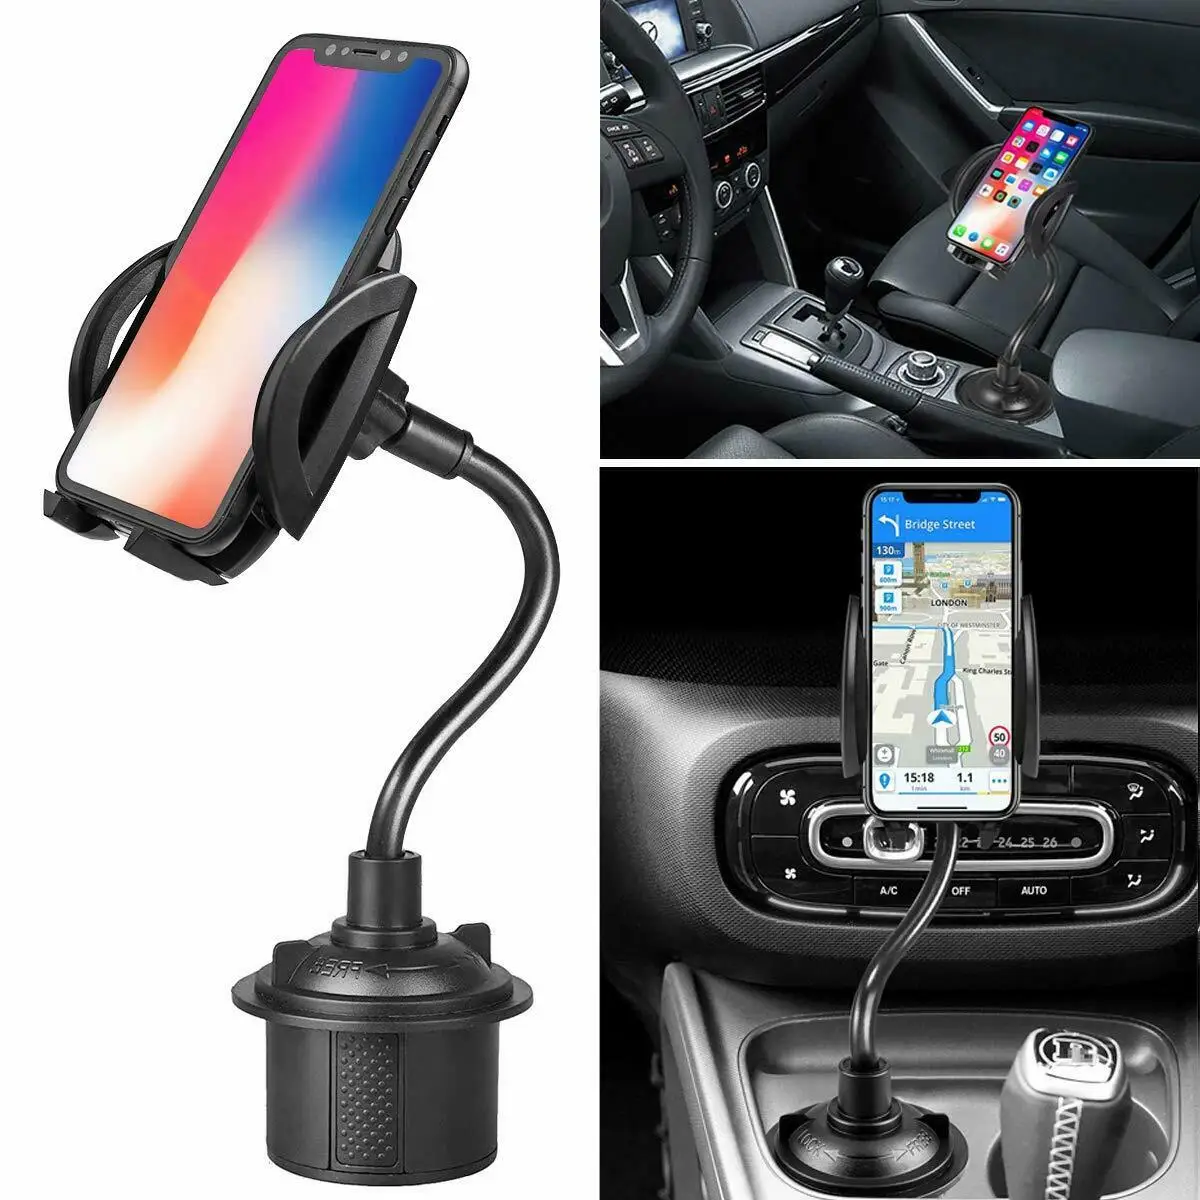 Gray Car Phone Mount,Universal Smart Phone Adjustable Automobile Cup Holder Phones Mount for iPhone Xs/Max/X/XR/8 Plus /7 Samsung Galaxy S10/S9/ S8 Note 9 Nexus HTC Huawei and All Smartphones